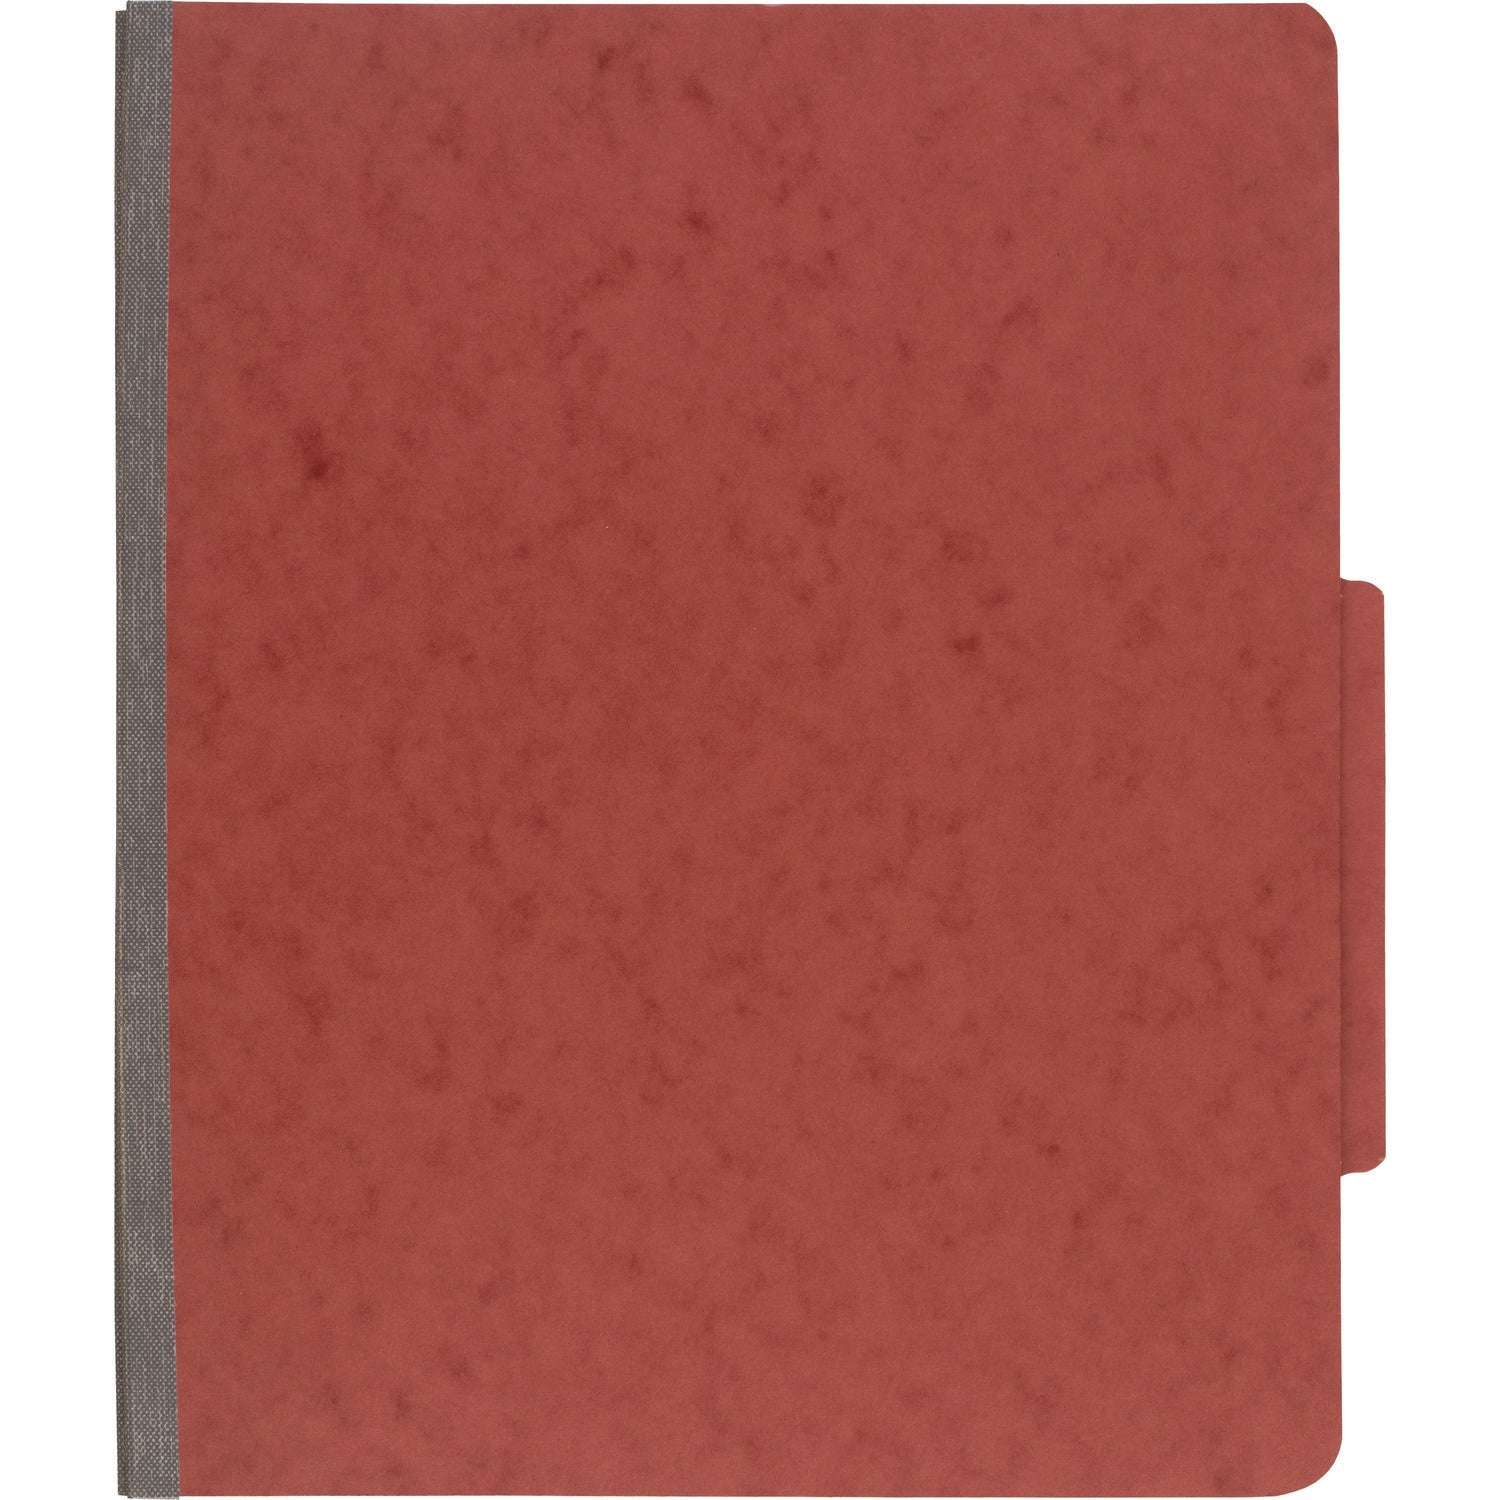 Pressboard Classification Folders, 2" Expansion, 1 Divider, 4 Fasteners, Letter Size, Earth Red Exterior, 10/Box